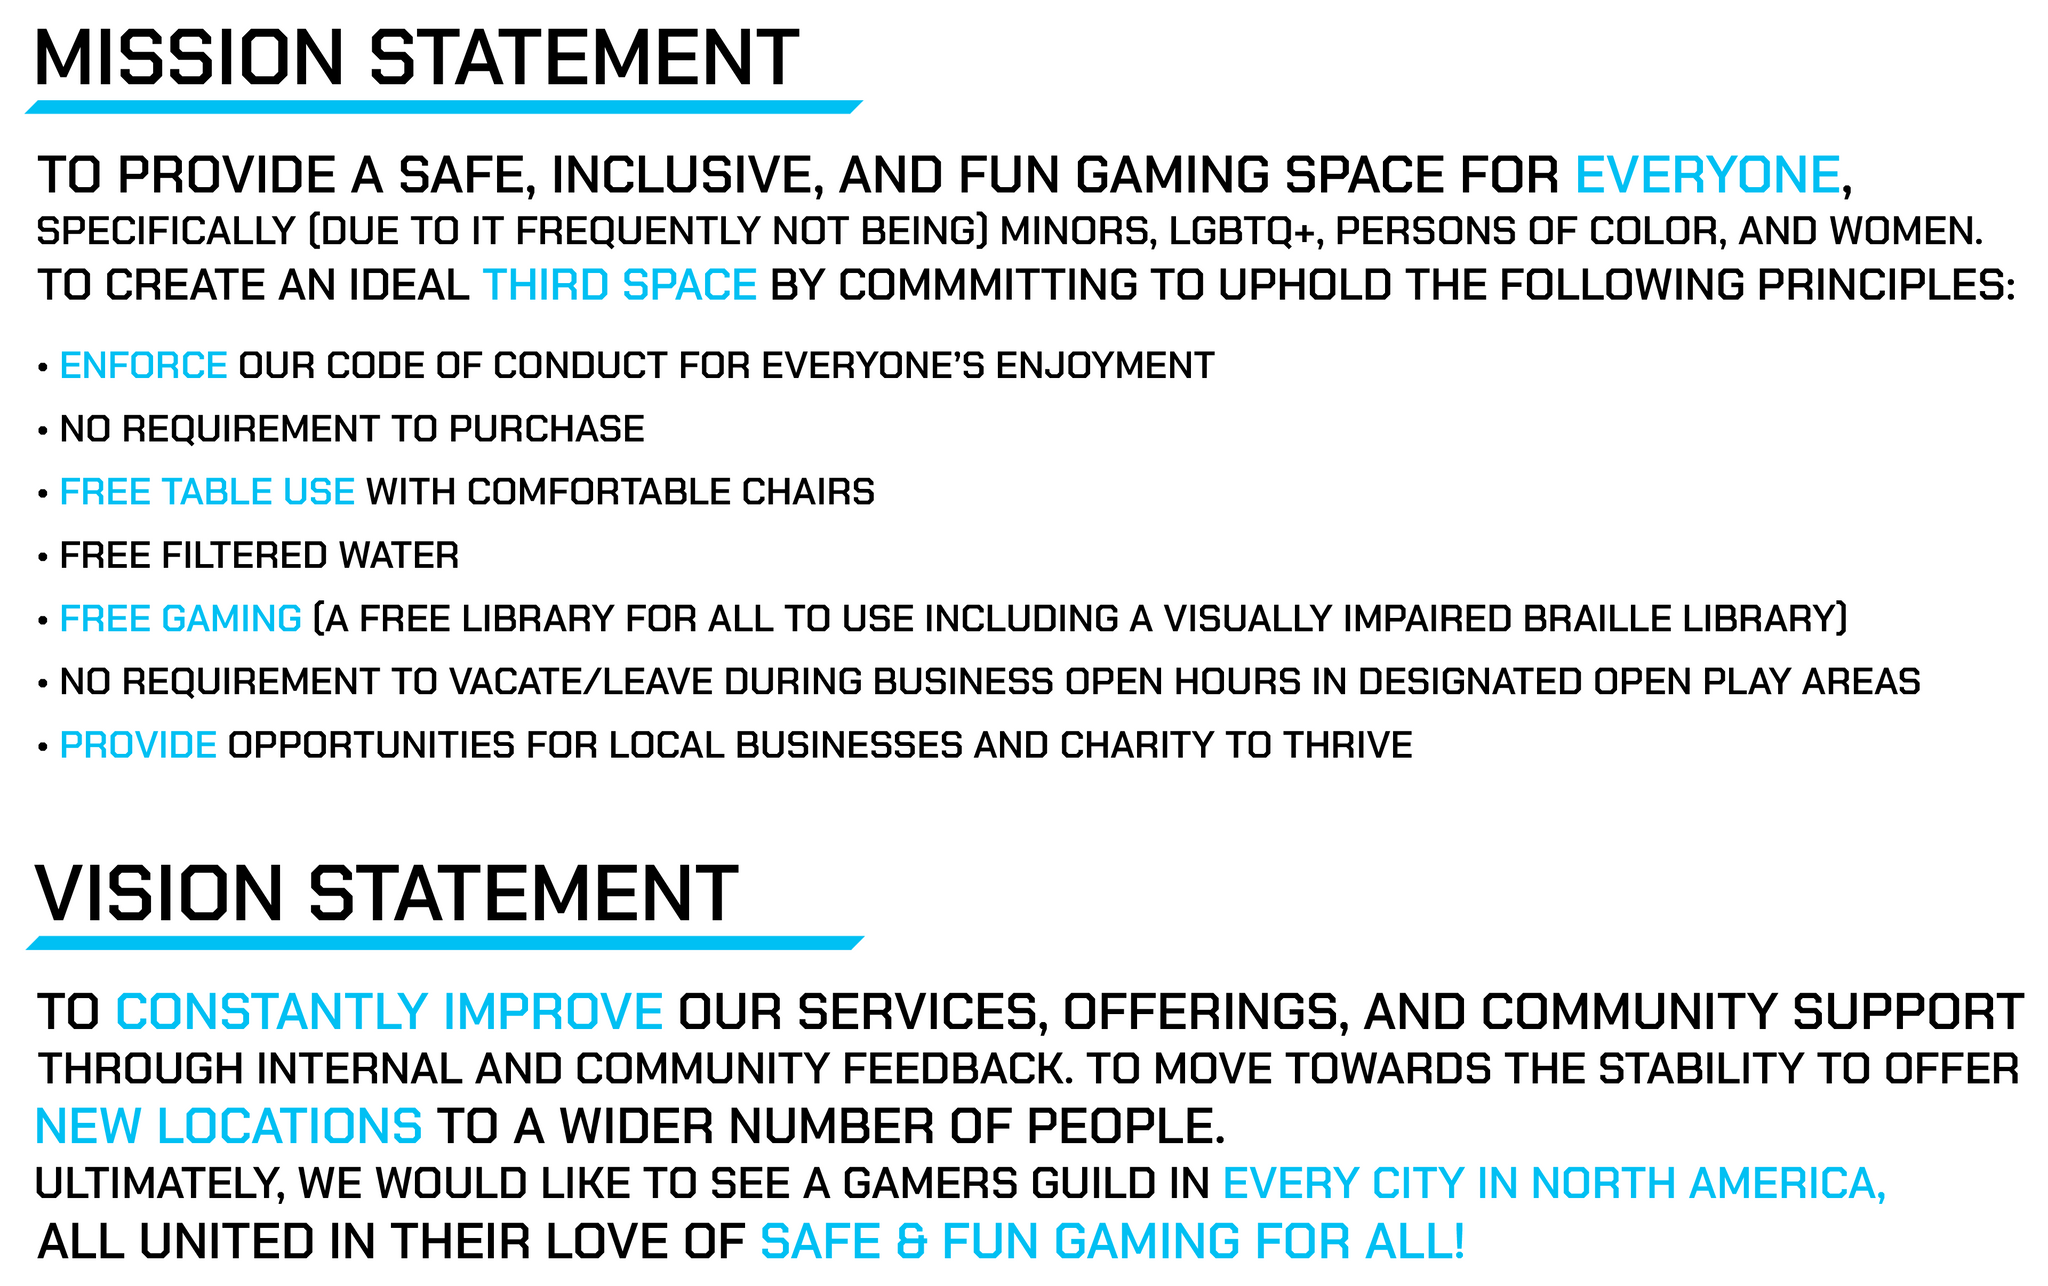 Mission: To provide a safe inclusive and fun space for EVERYONE, but specifically due to it frequently not being, minors, LGBTQ+, POC, and women. To create a third space by upholding these principles: Enforce our code of conduct, no pressure to purchase, Free Table use, Free Water, Free Gaming library, no pressure to vacate during open hours, support local charities. Vision: to constantly improve our services, offerings, and community through feedback, and move towards offering new locations to more people.